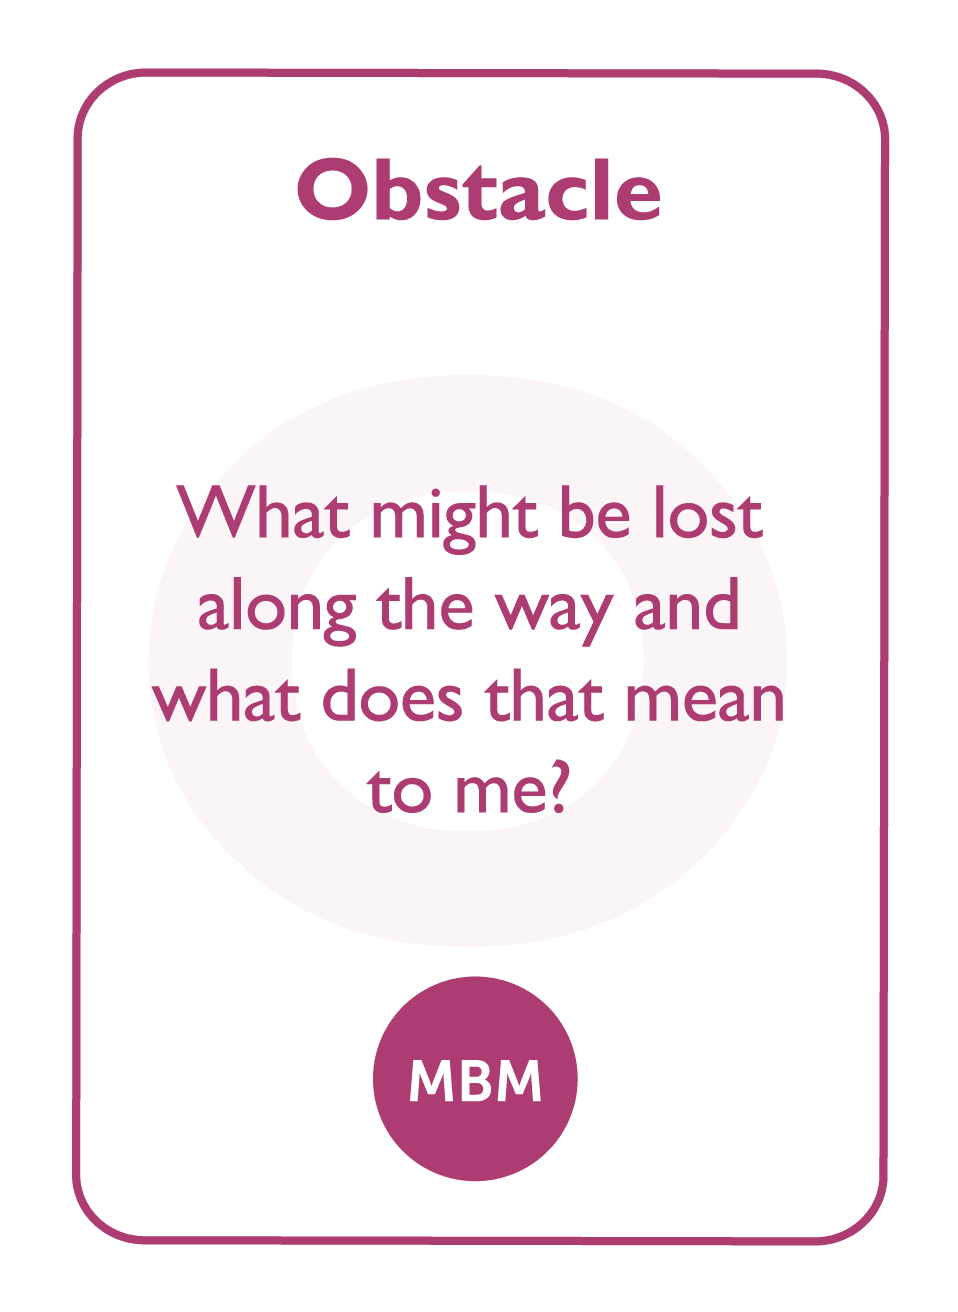 Coaching card titled Obstacle